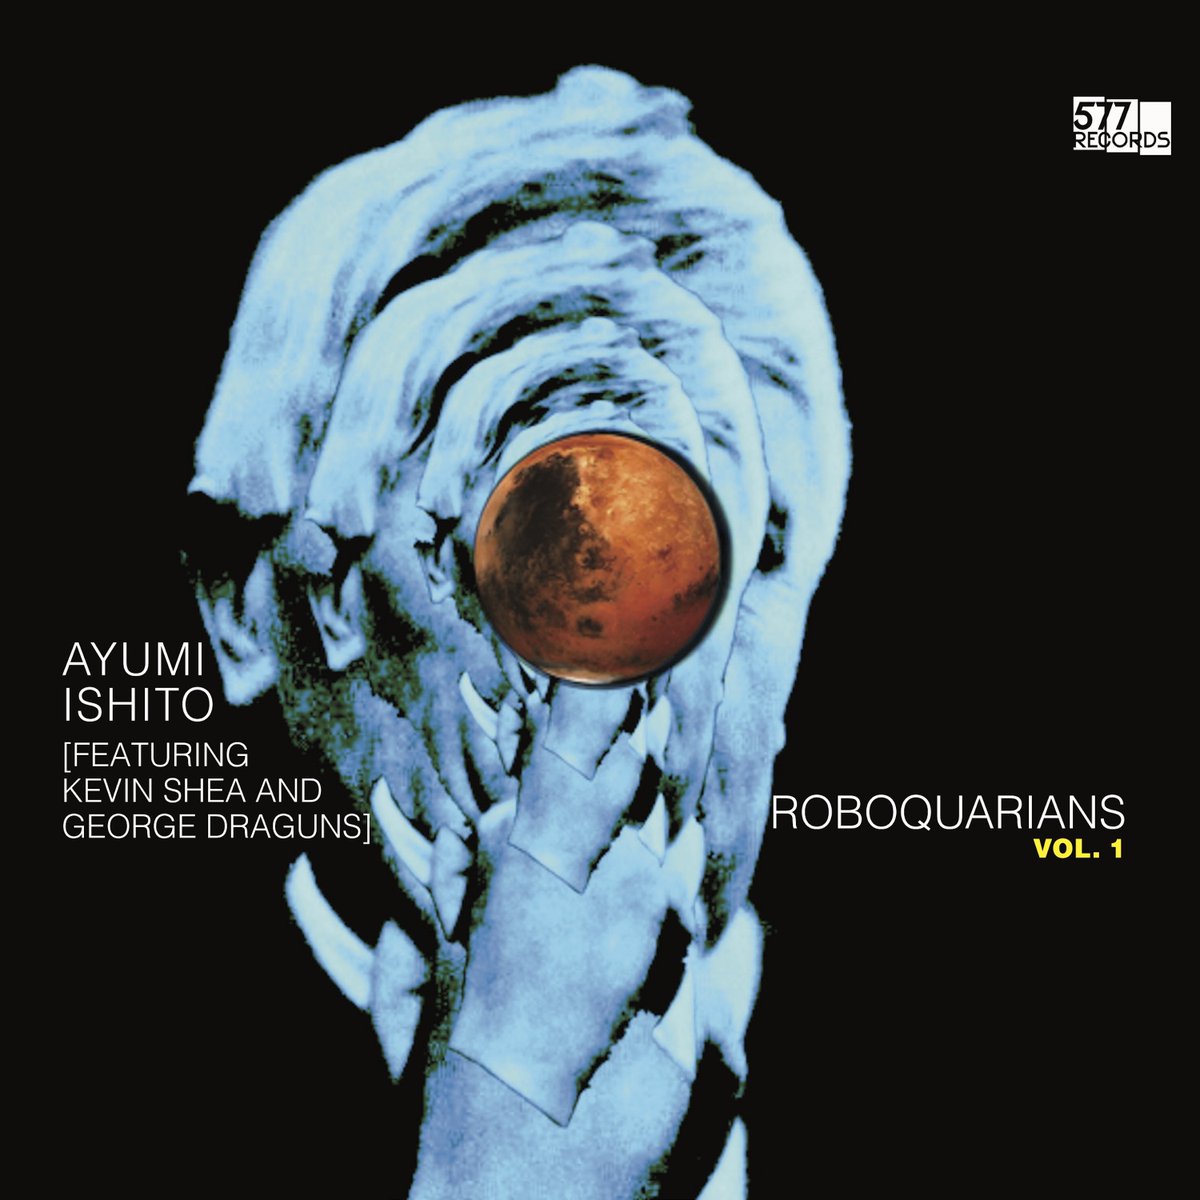 OUT TODAY! Brooklyn-Based Saxophonist Ayumi Ishito Together with Like Minded Musicians Presents ‘The Roboquarians, Vol. 1’, Her Brand New Vivid Avant-Punk Album 577records.bandcamp.com/album/roboquar…